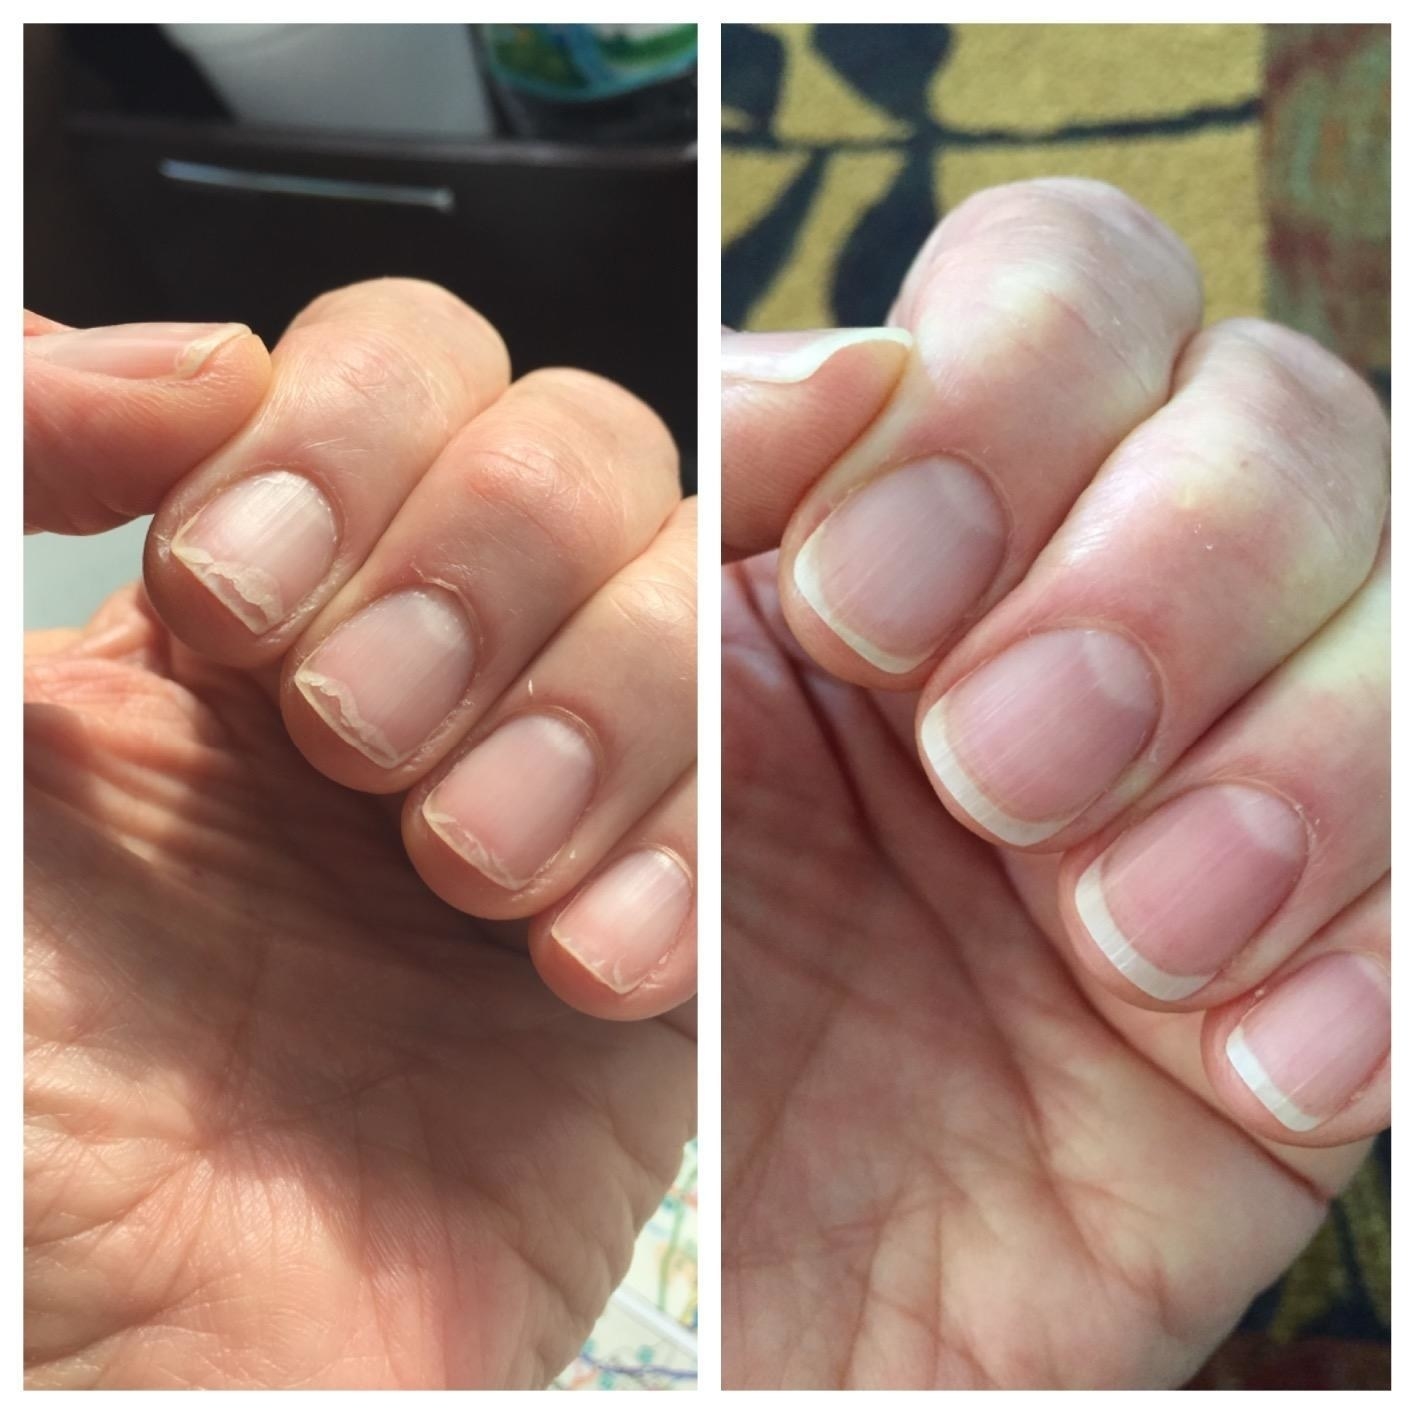 A before image of a reviewer&#x27;s brittle nails and an after image of them looking healthier